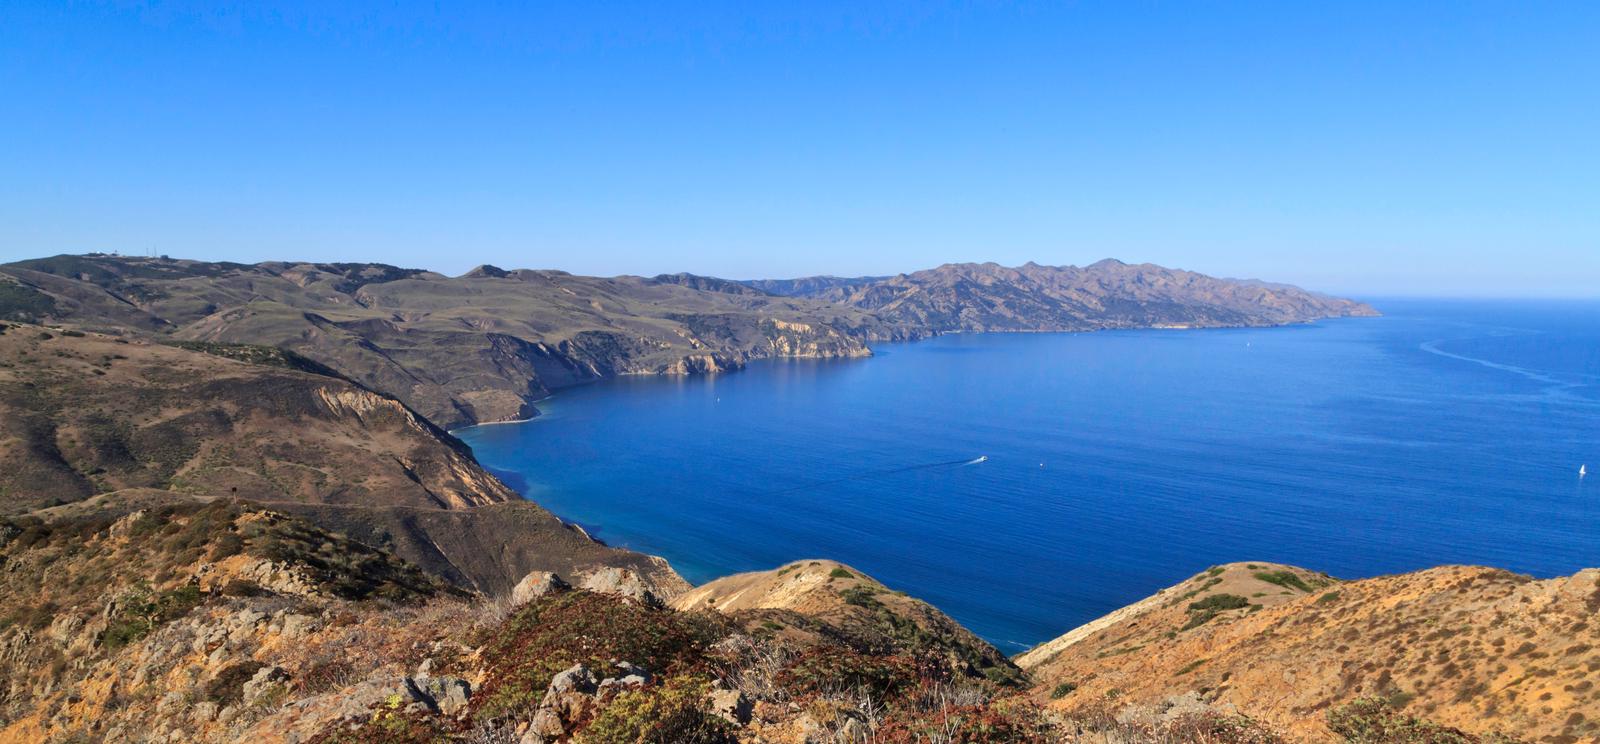 View from a high ridge overlooking the rest of a long, narrow, rugged island with steep cliffs.  Chinese Harbor, Santa Cruz Island